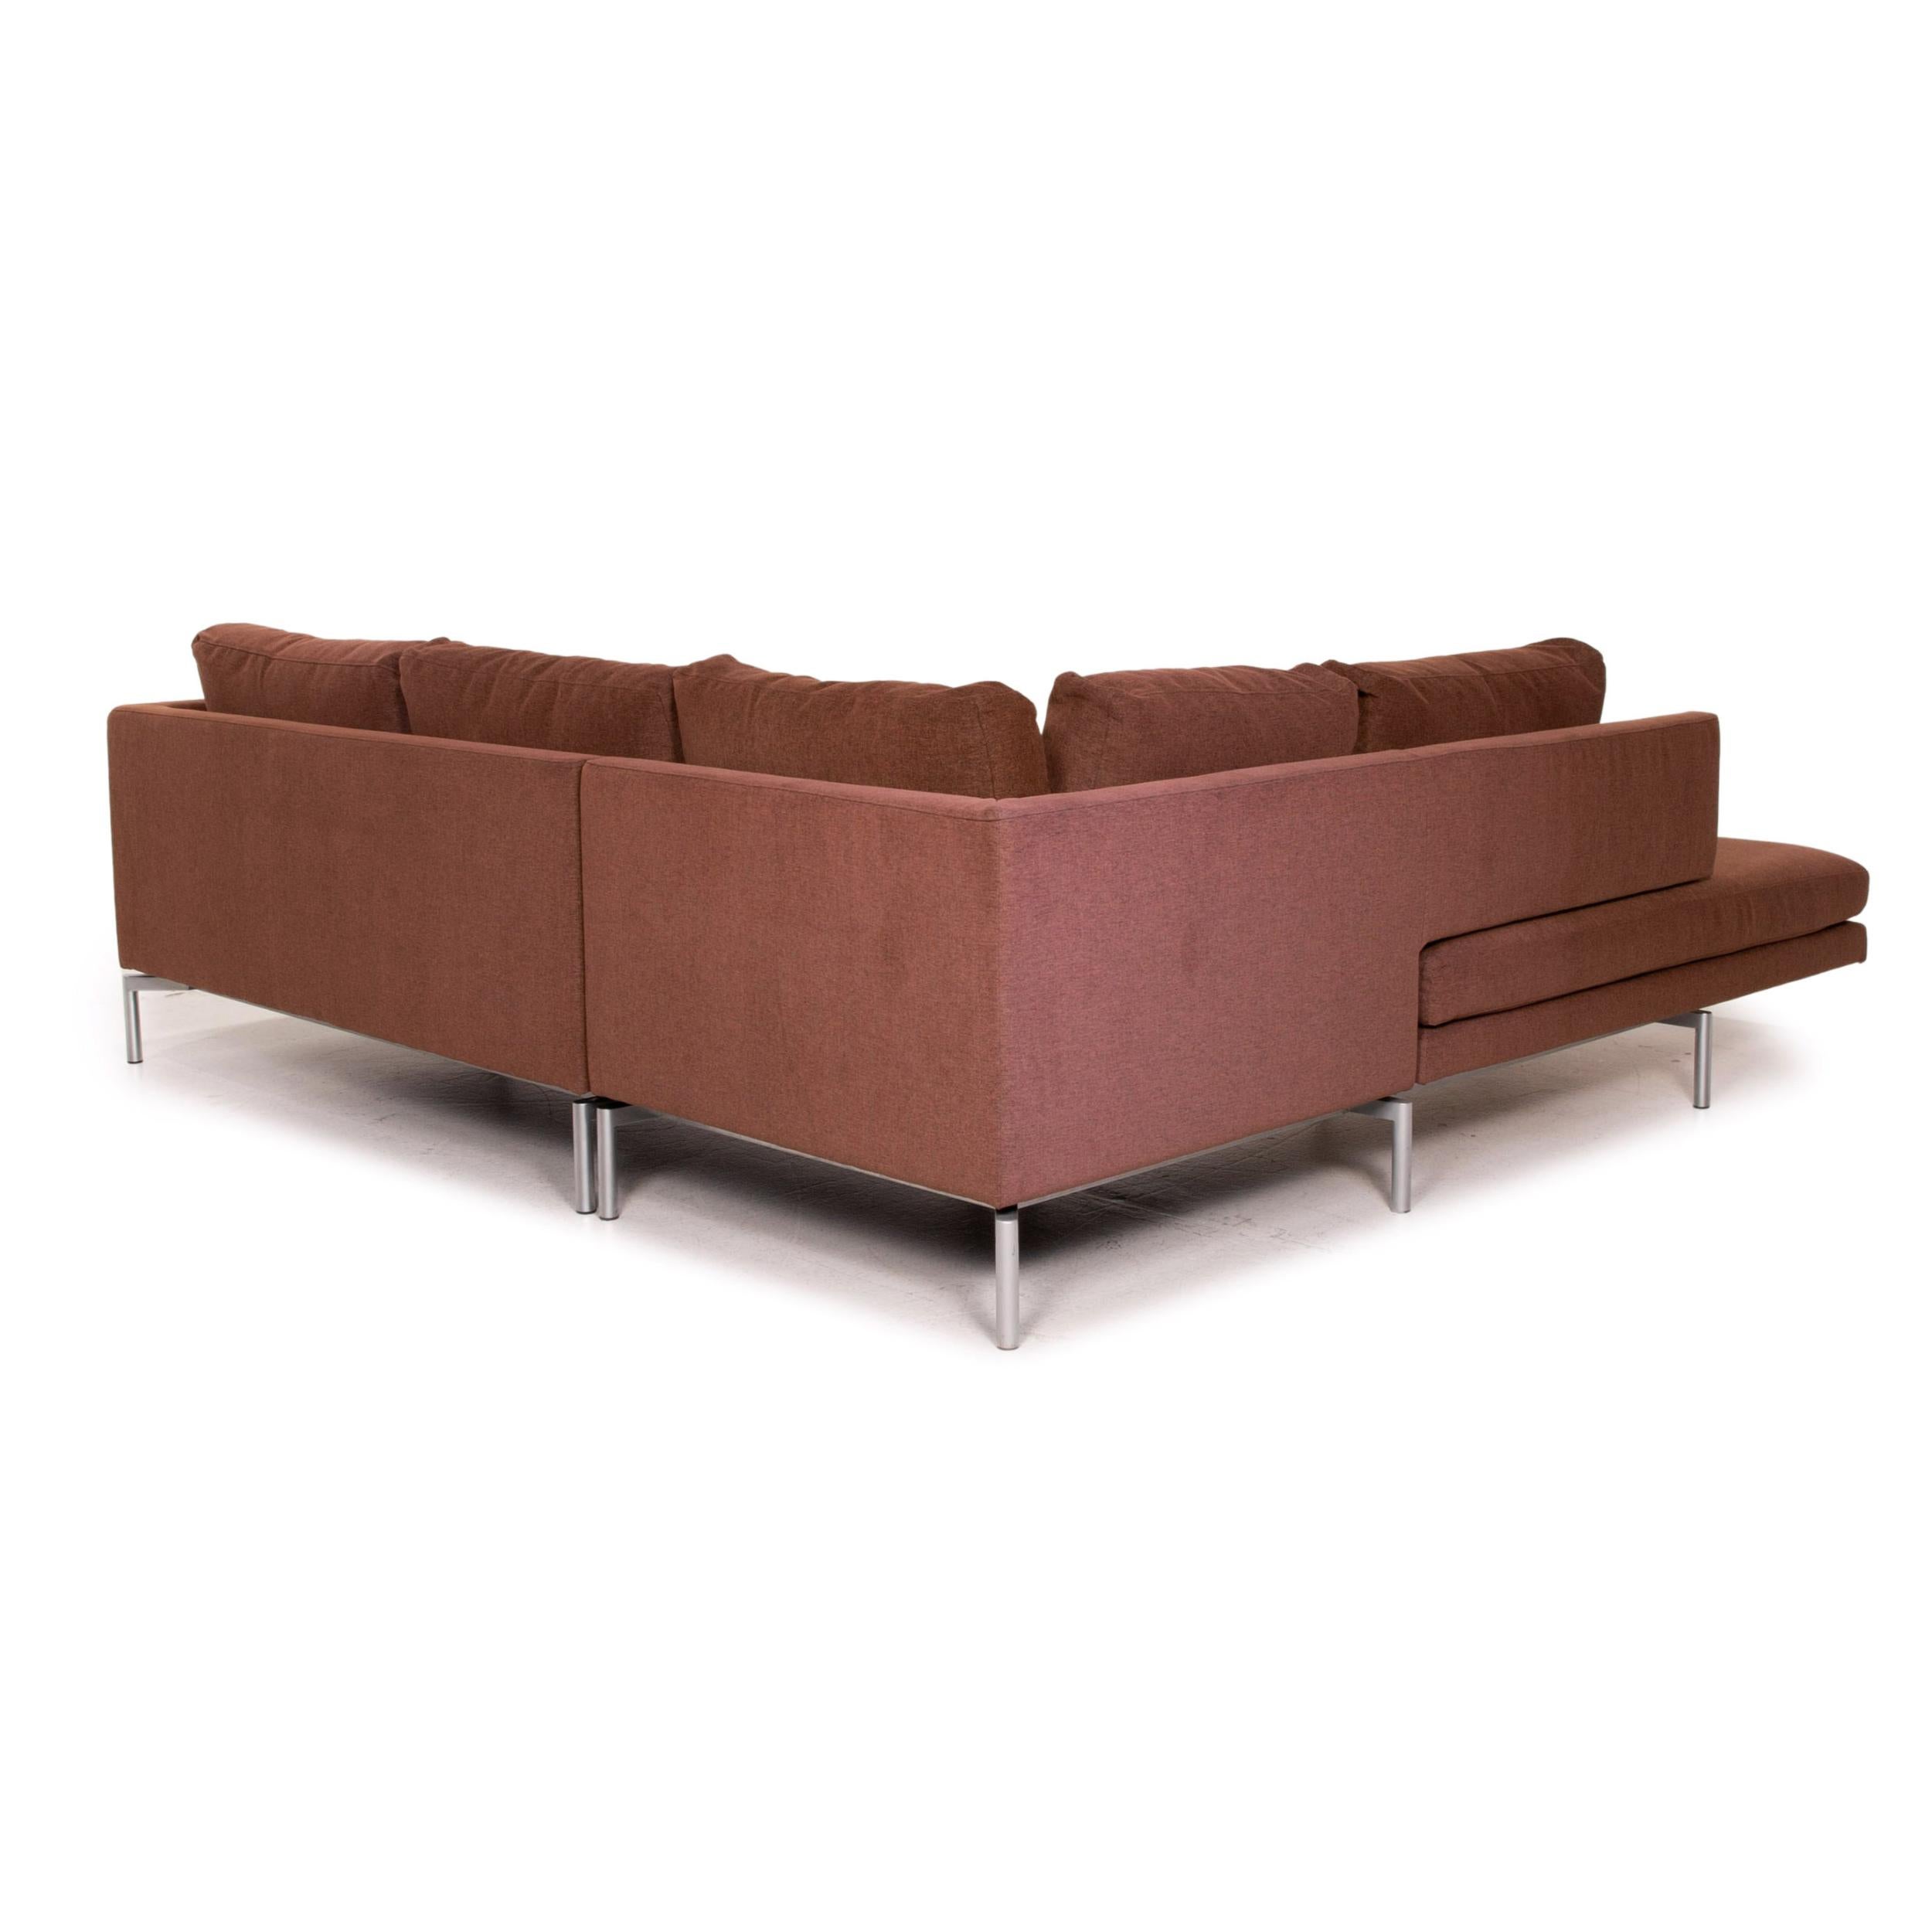 Walter Knoll Good Times Fabric Corner Sofa Brown Function Couch 5